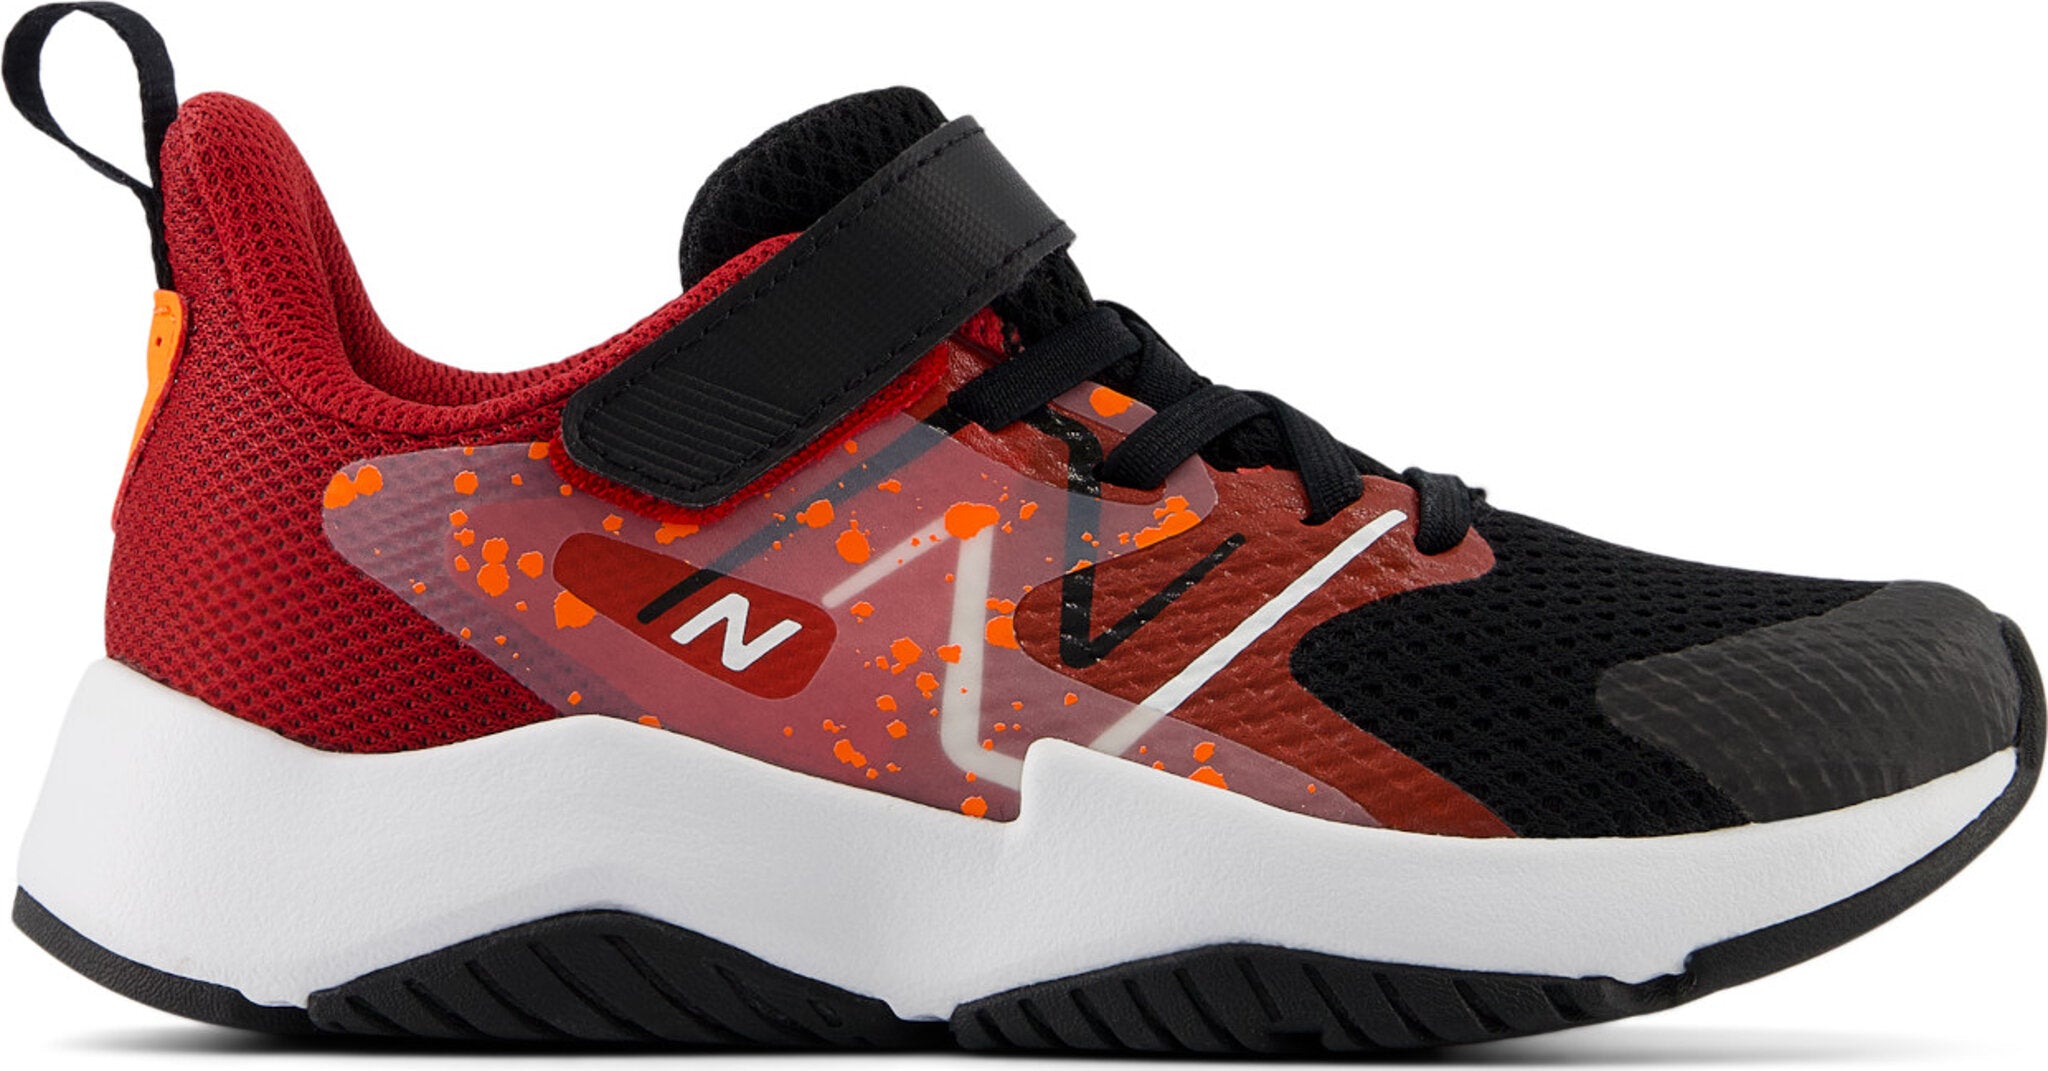 New Balance Ytravv2 Rave Run V2 Bungee Lace With Top Strap Girls' Shoes - Black/True Red/Blaze Orange, 2, Standard